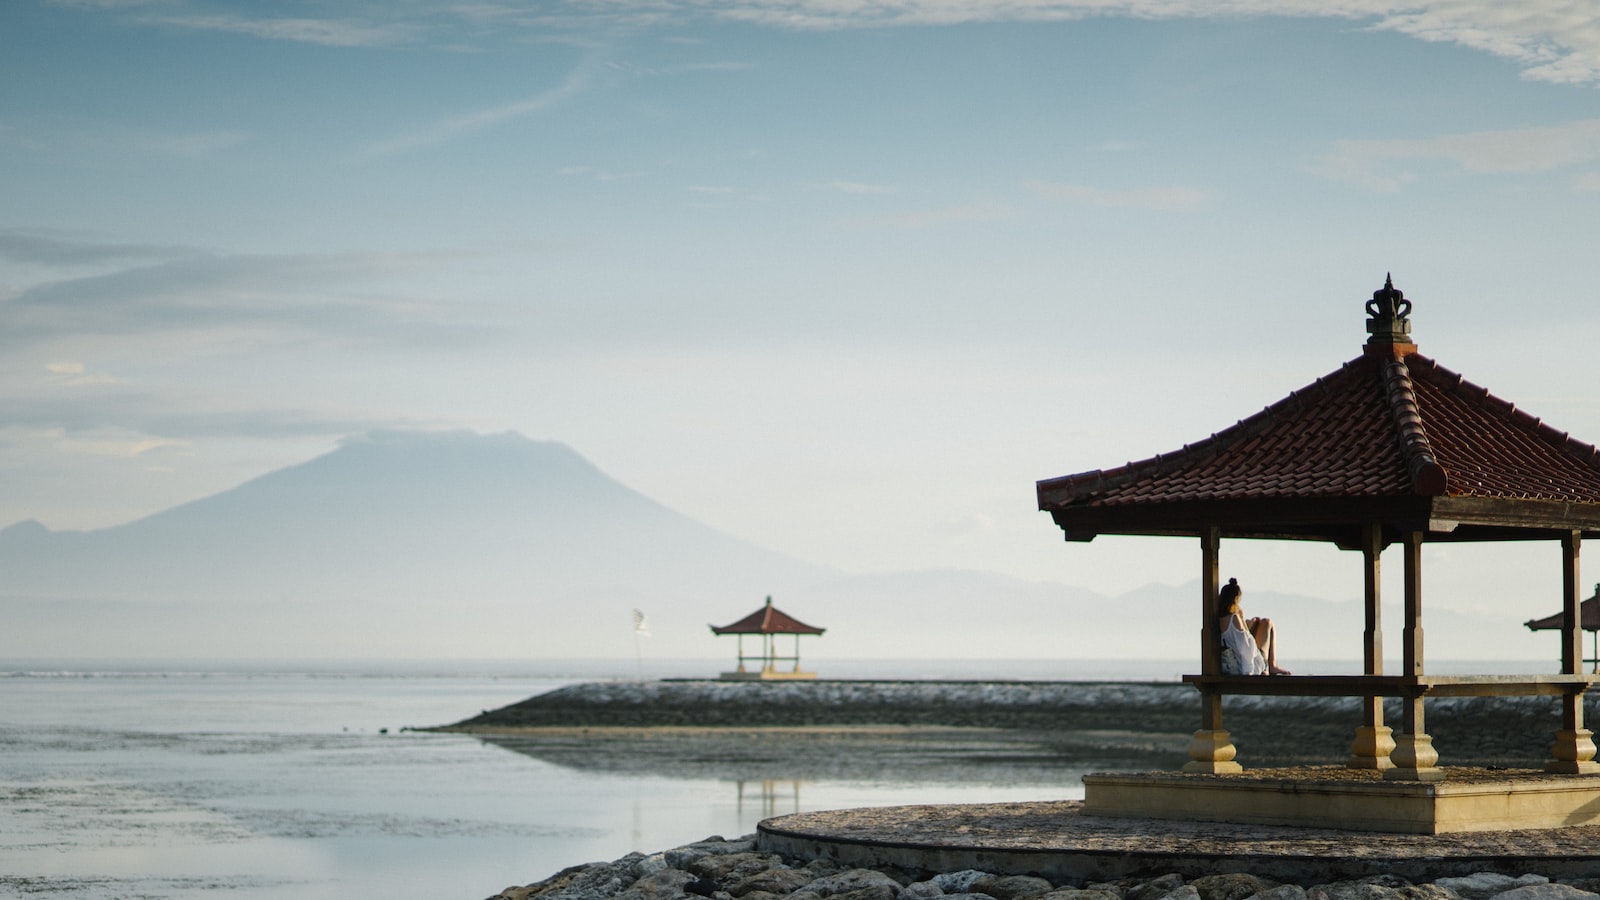 Bali's Strategy: Enhancing Accessibility to Boost Tourism